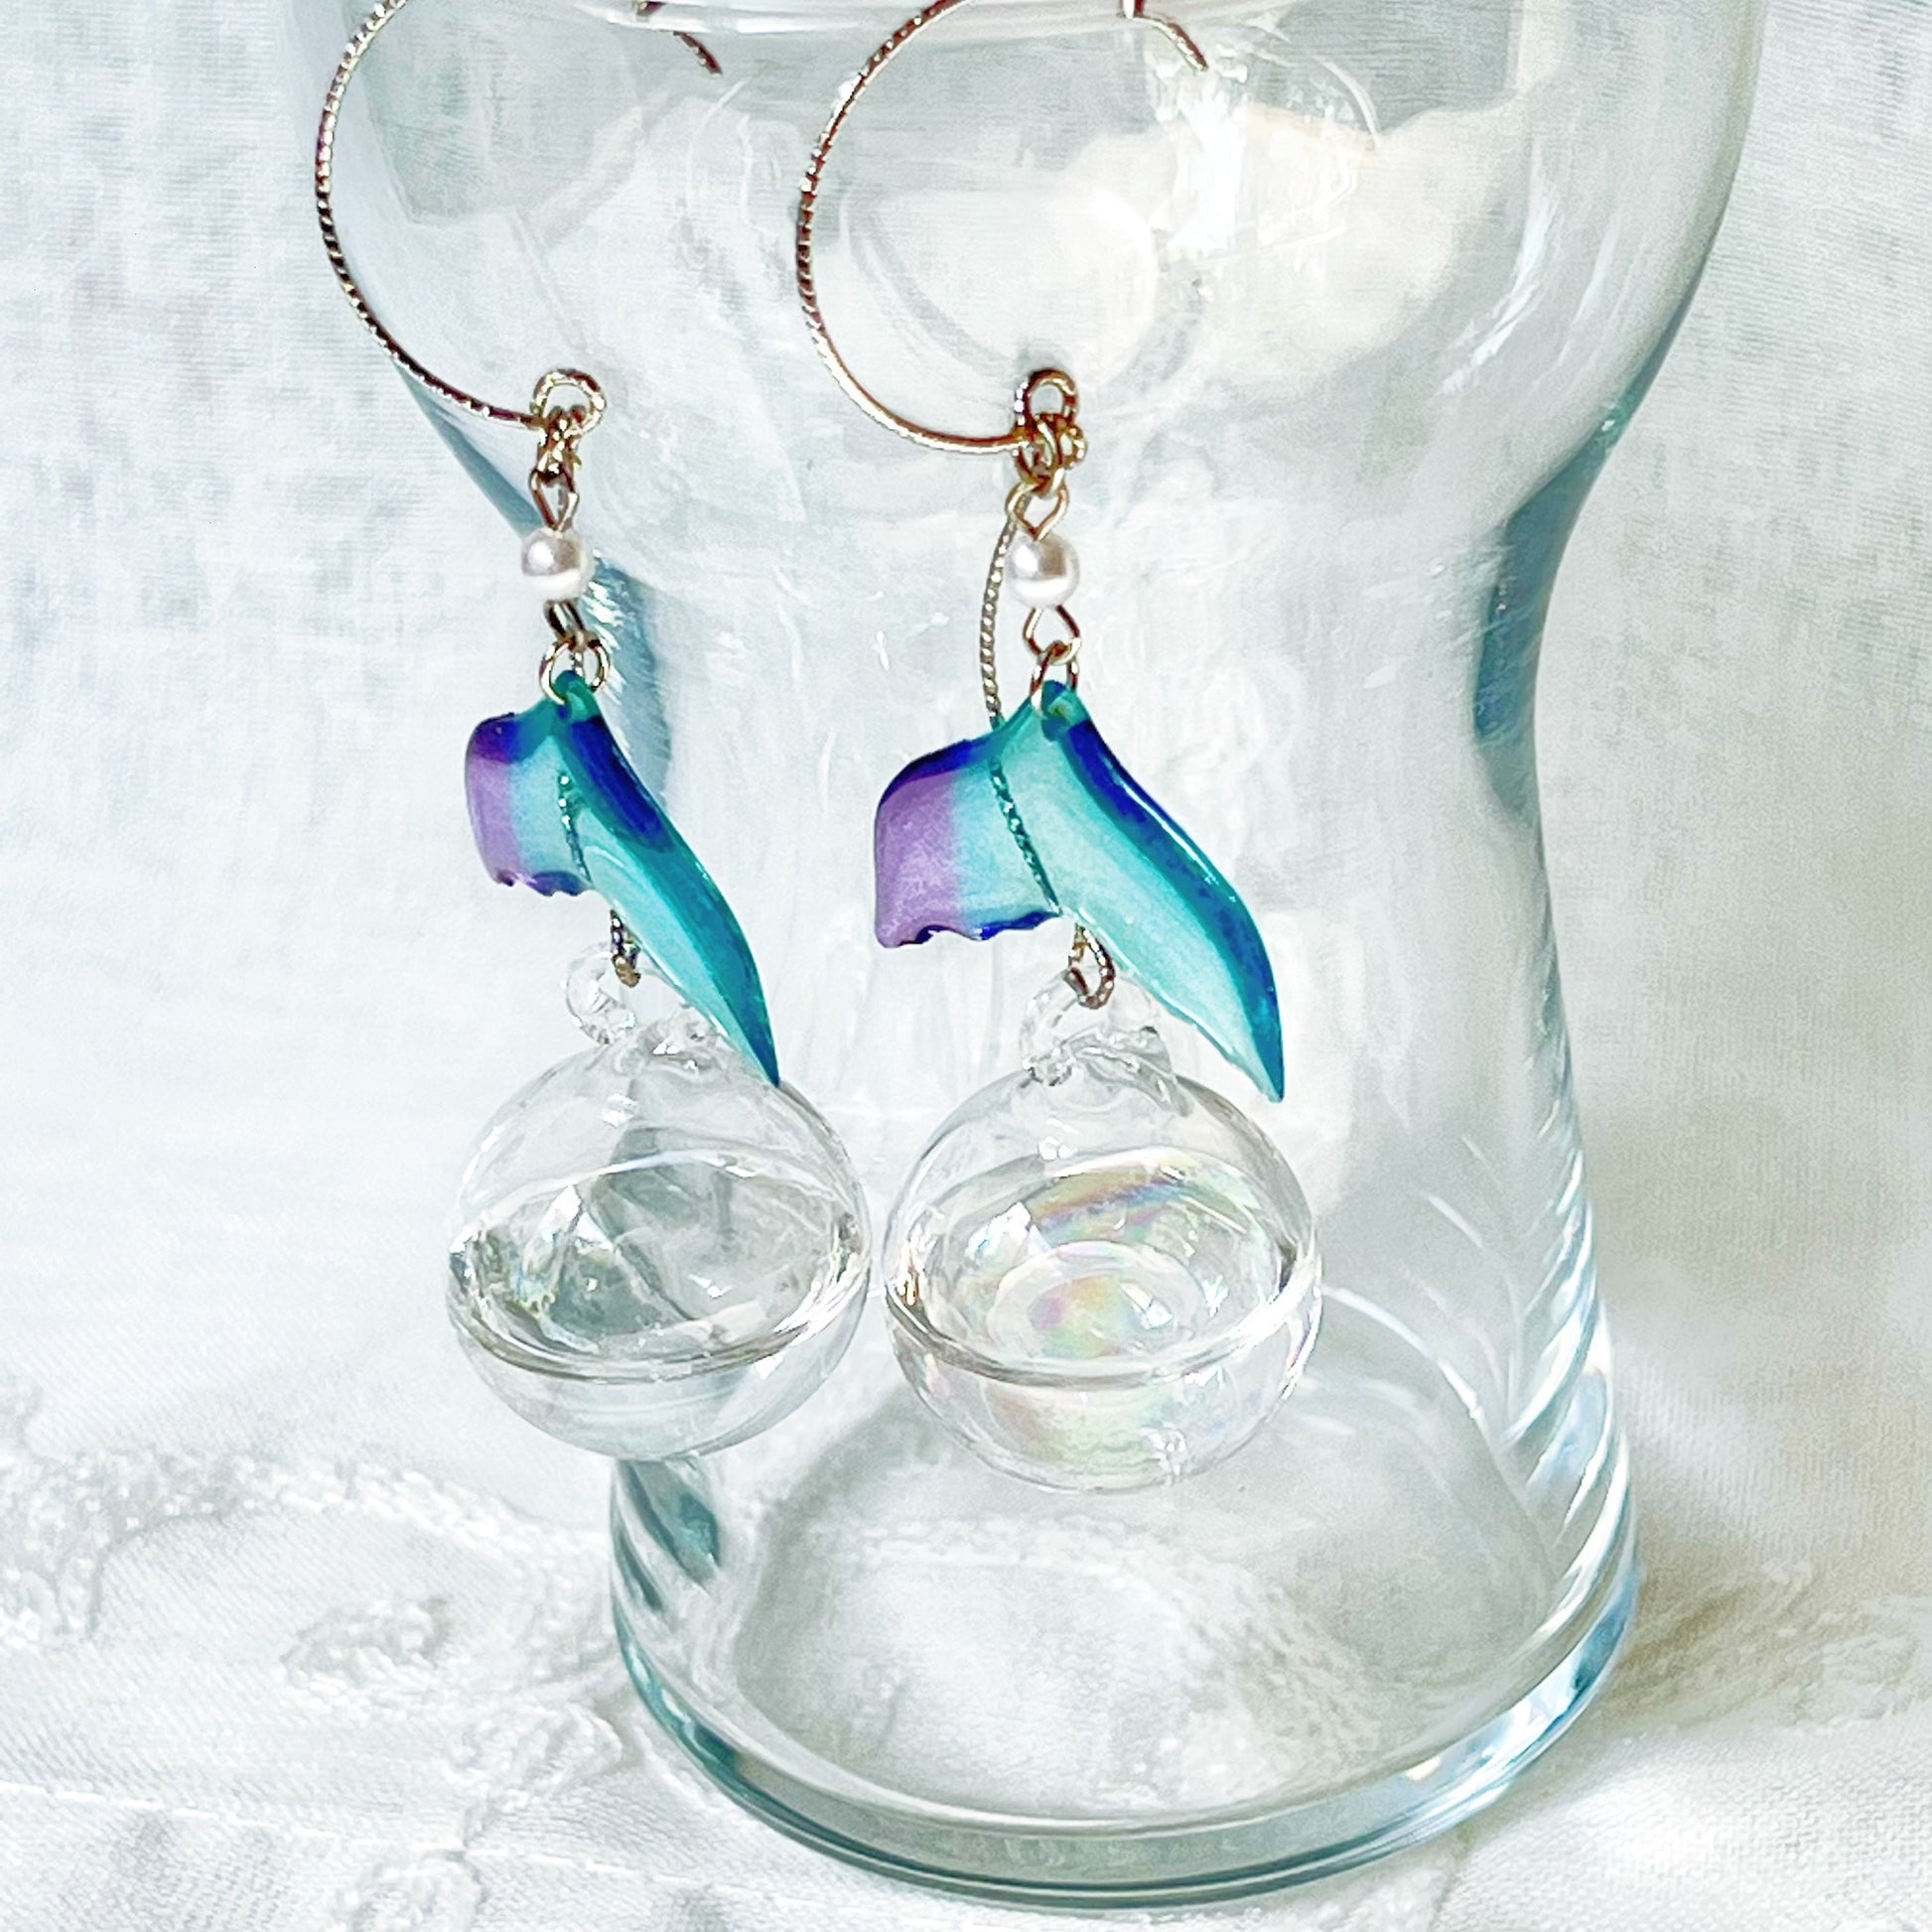 Blue Mermaid Tail and Bubbles Statement Earrings-Ninaouity